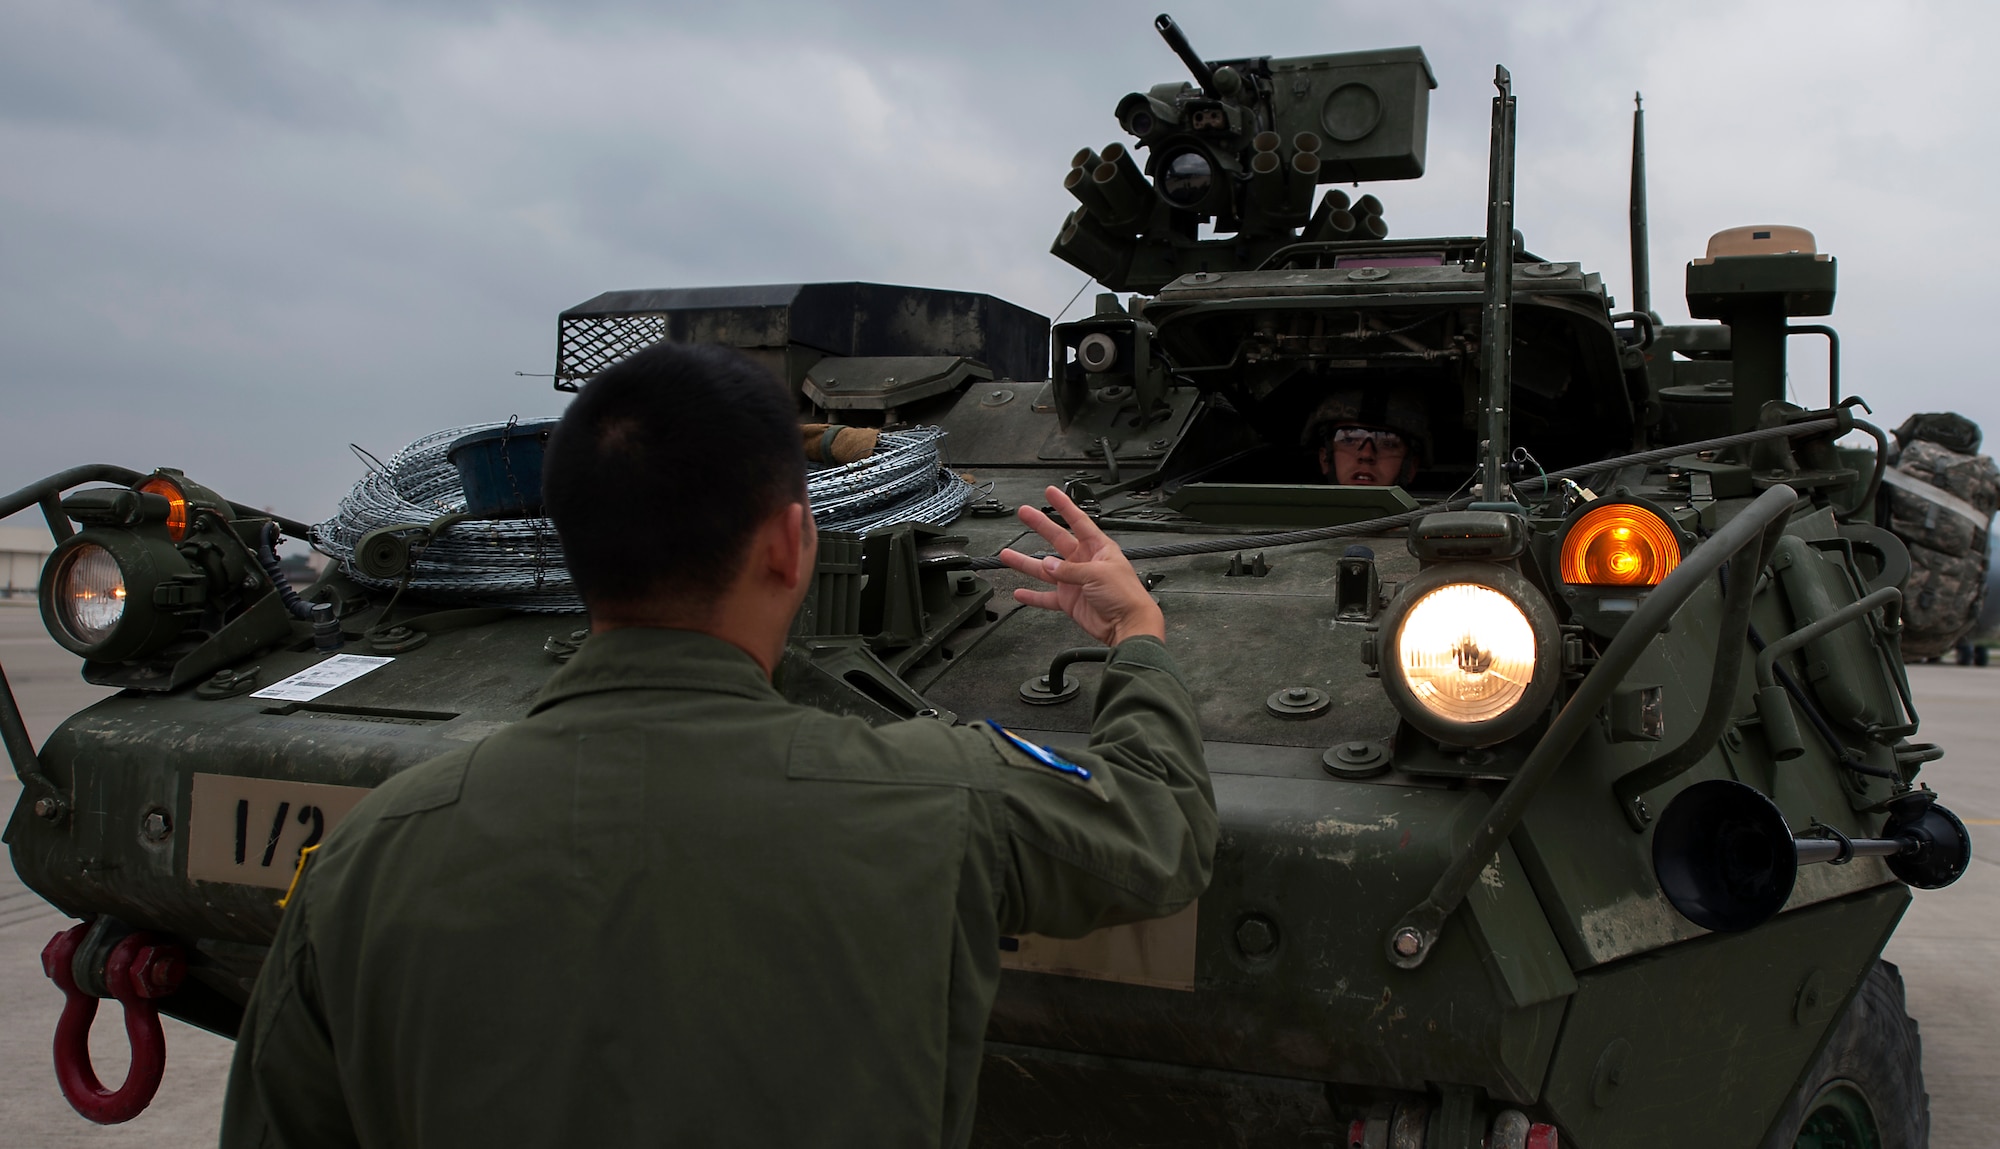 Staff Sgt. Quan Vu, 7th Airlift Squadron loadmaster, instructs Army Private 1st Class Austin Hurrelbrink, 2nd Cavalry Regiment soldier, on proper procedures of loading a Stryker into a C-17 Globemaster III in support of Steadfast Javelin II on Ramstein Air Base, Germany, Sept. 2, 2014. (U.S. Air Force photo/Senior Airman Damon Kasberg)